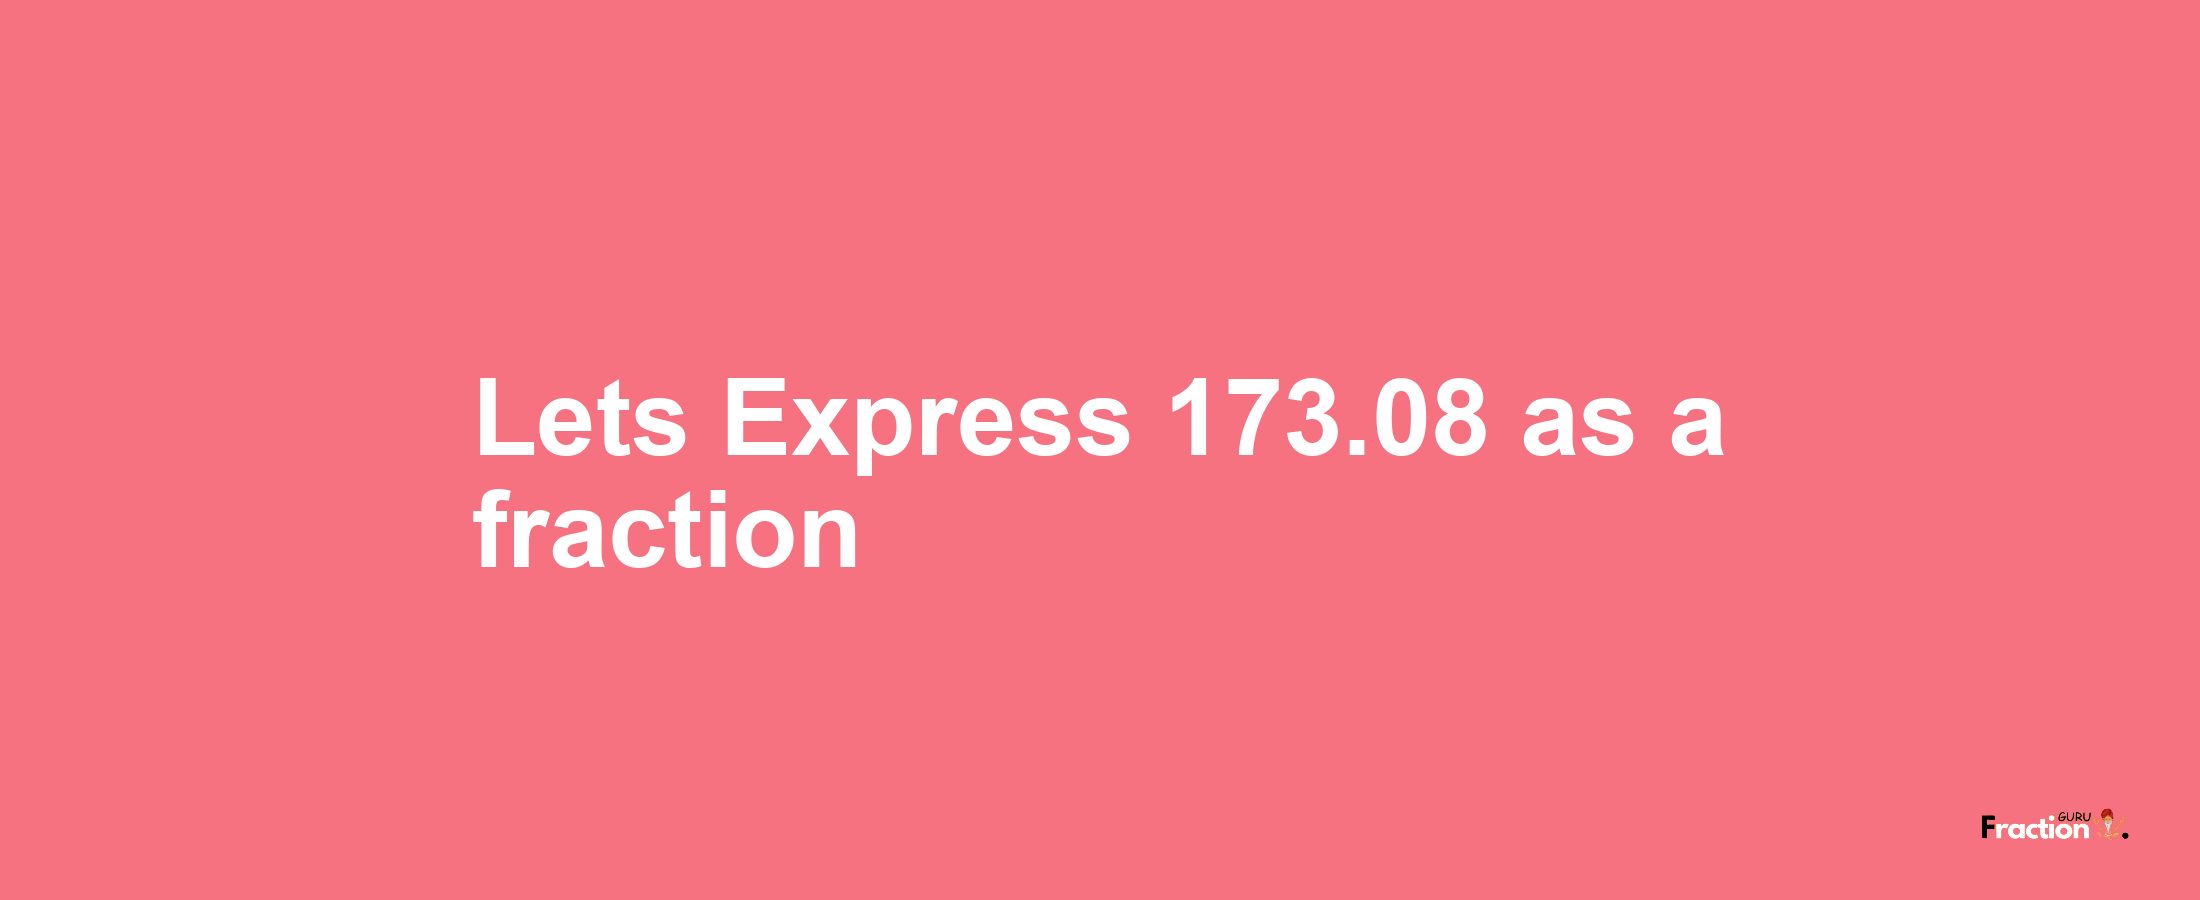 Lets Express 173.08 as afraction